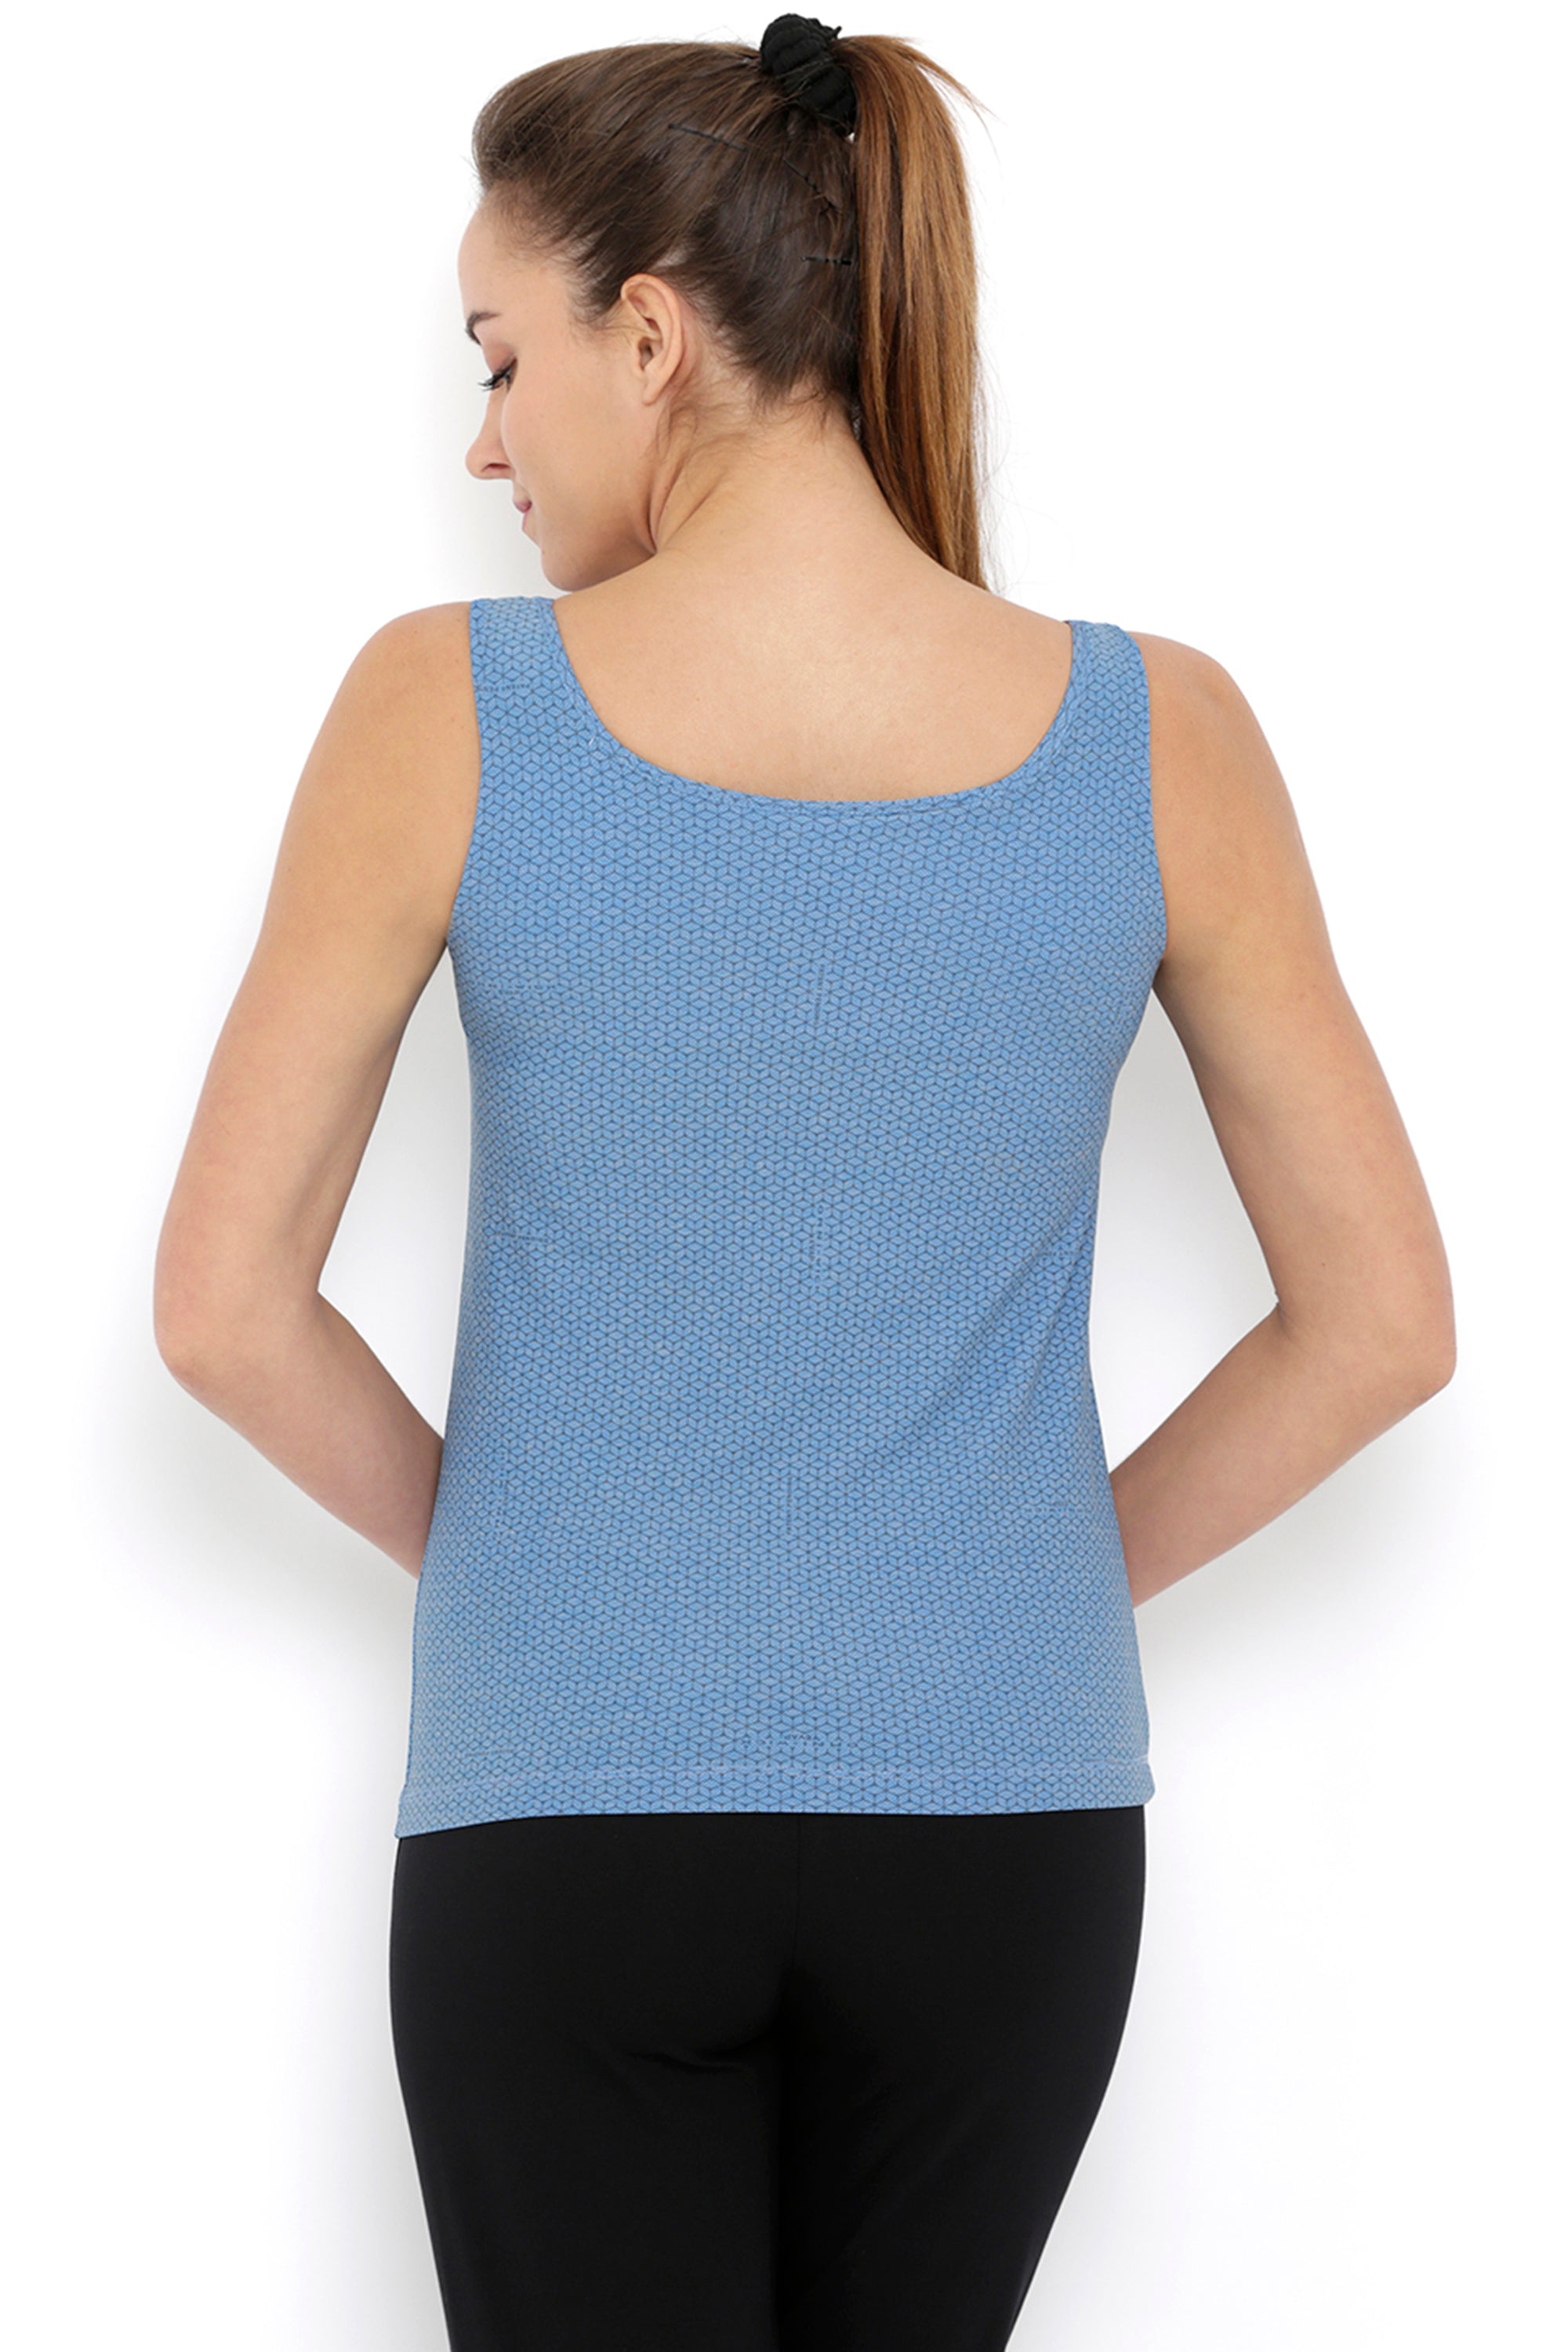 Blue Sleeveless Tee With Built in Bra Cups BT69